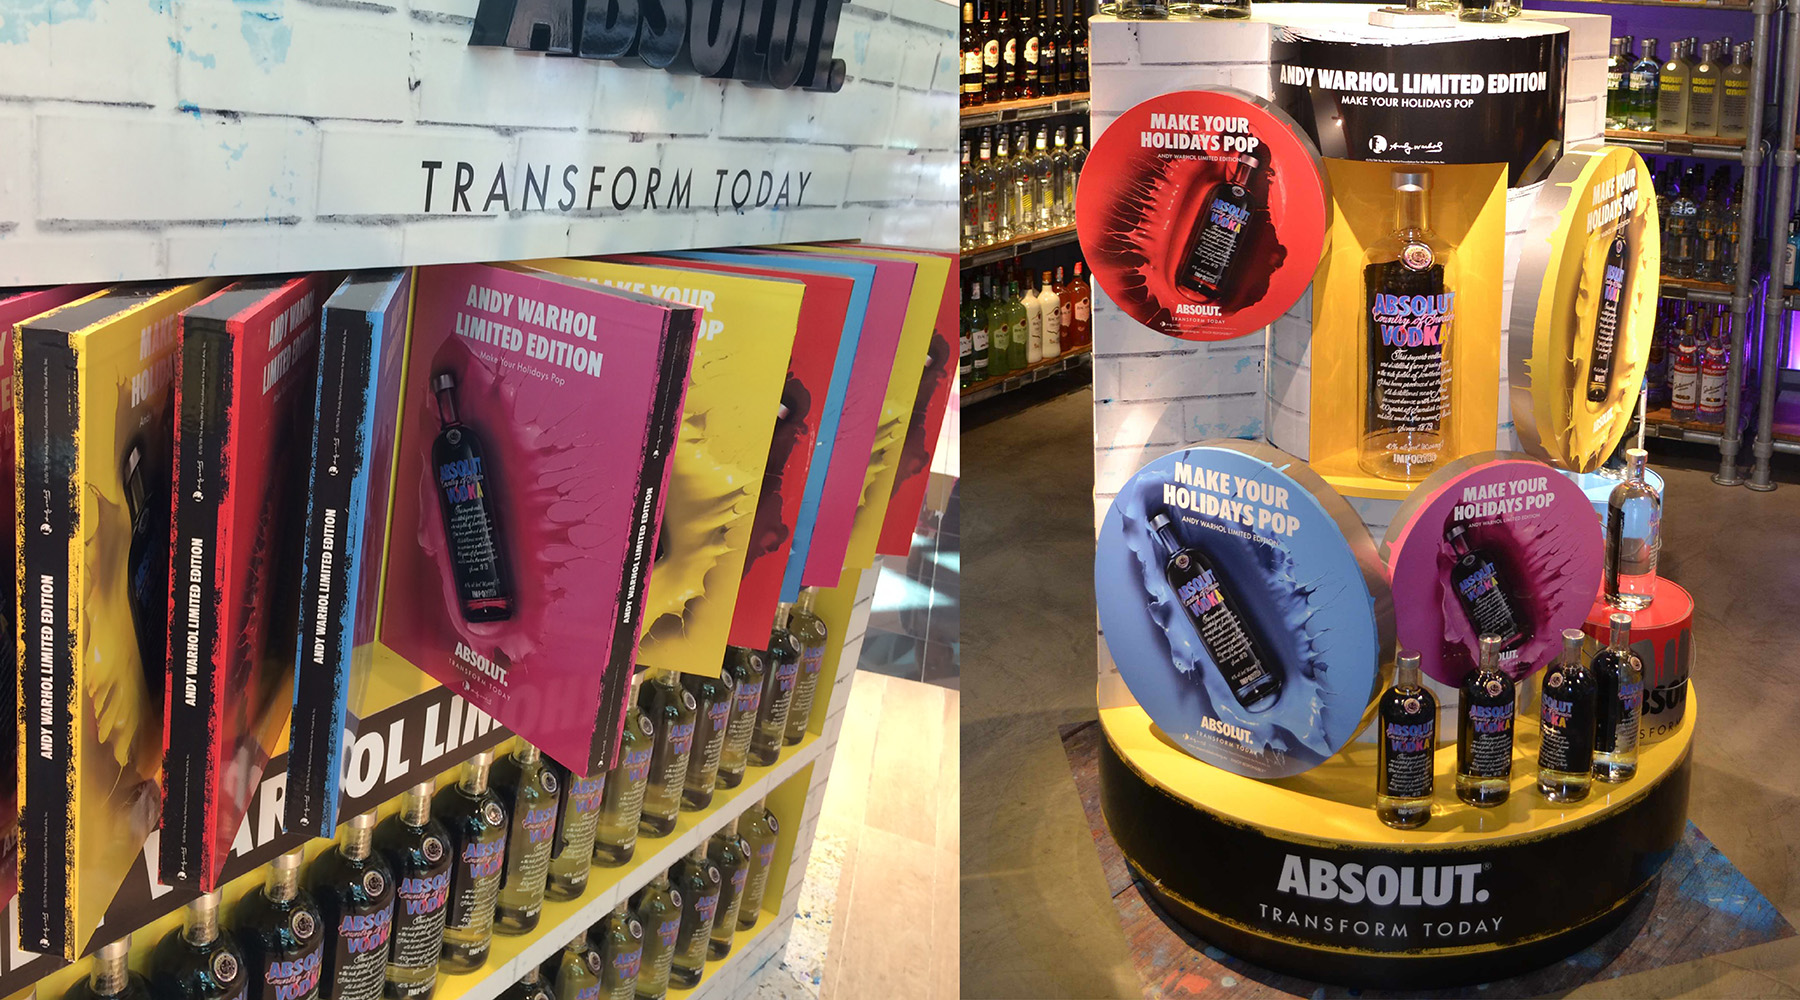 Absolut Warhol, Schiphol and Rome